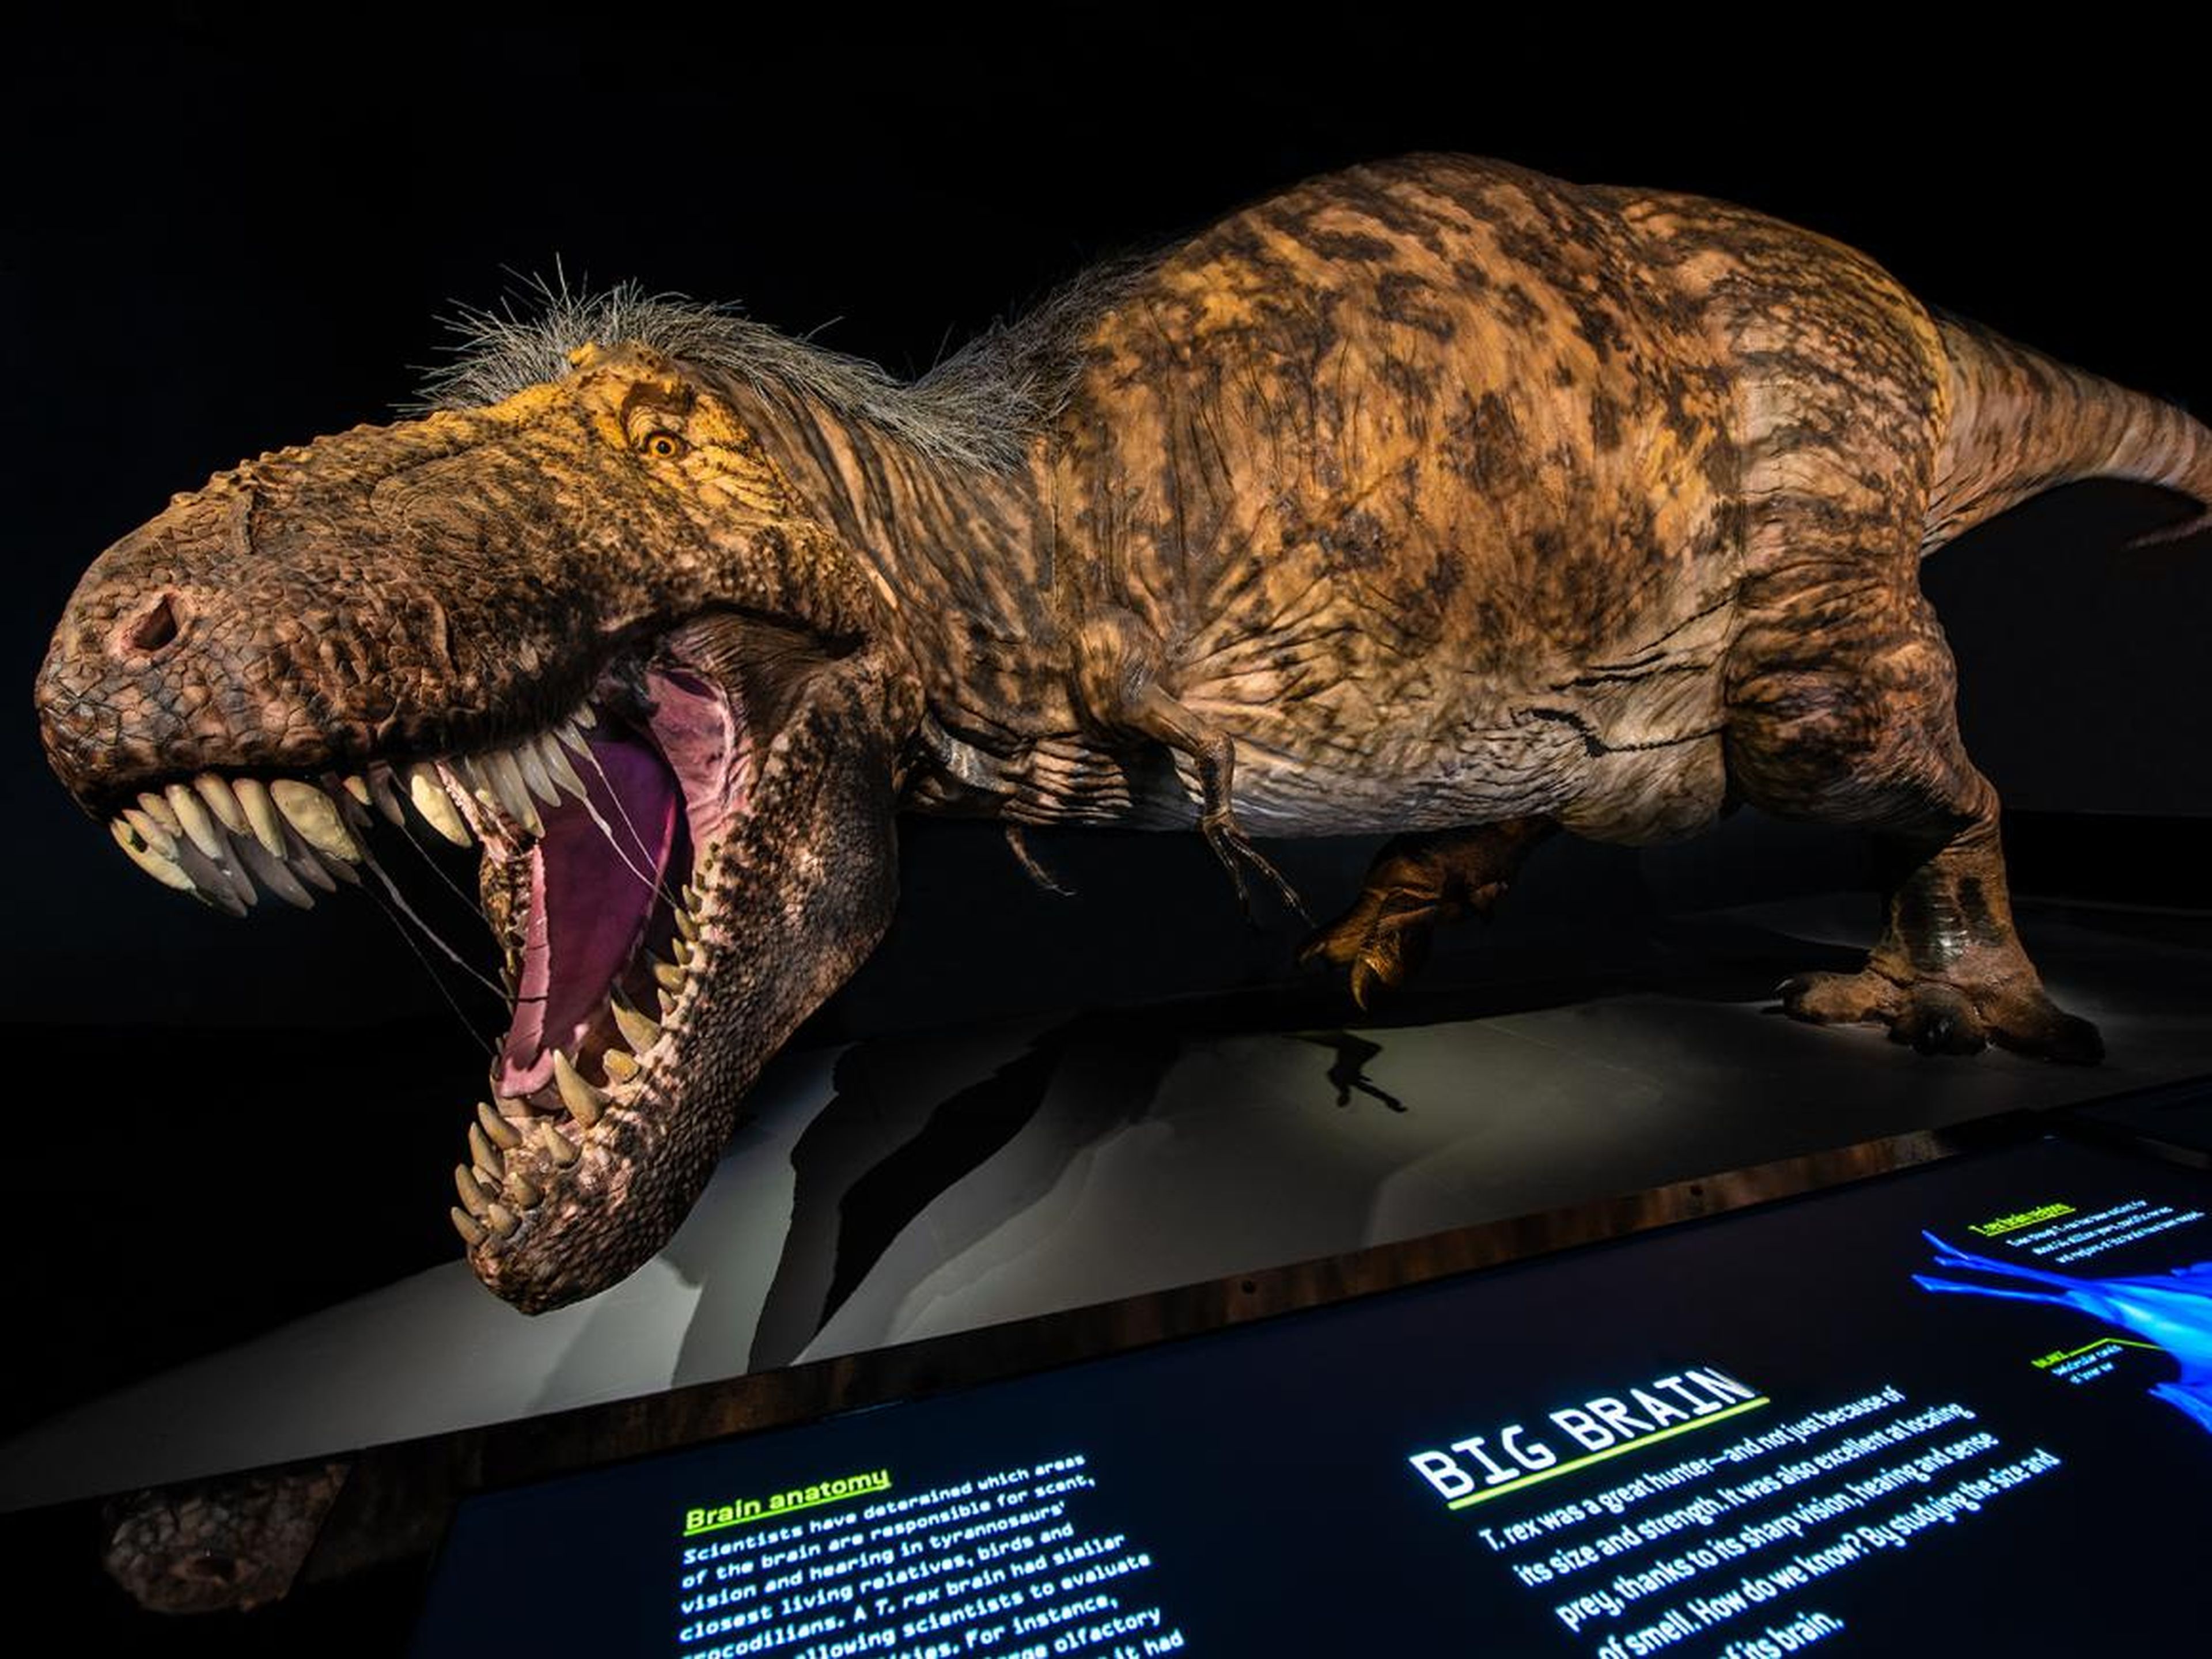 There are still a few lingering mysteries about T. rex, including what color it was.